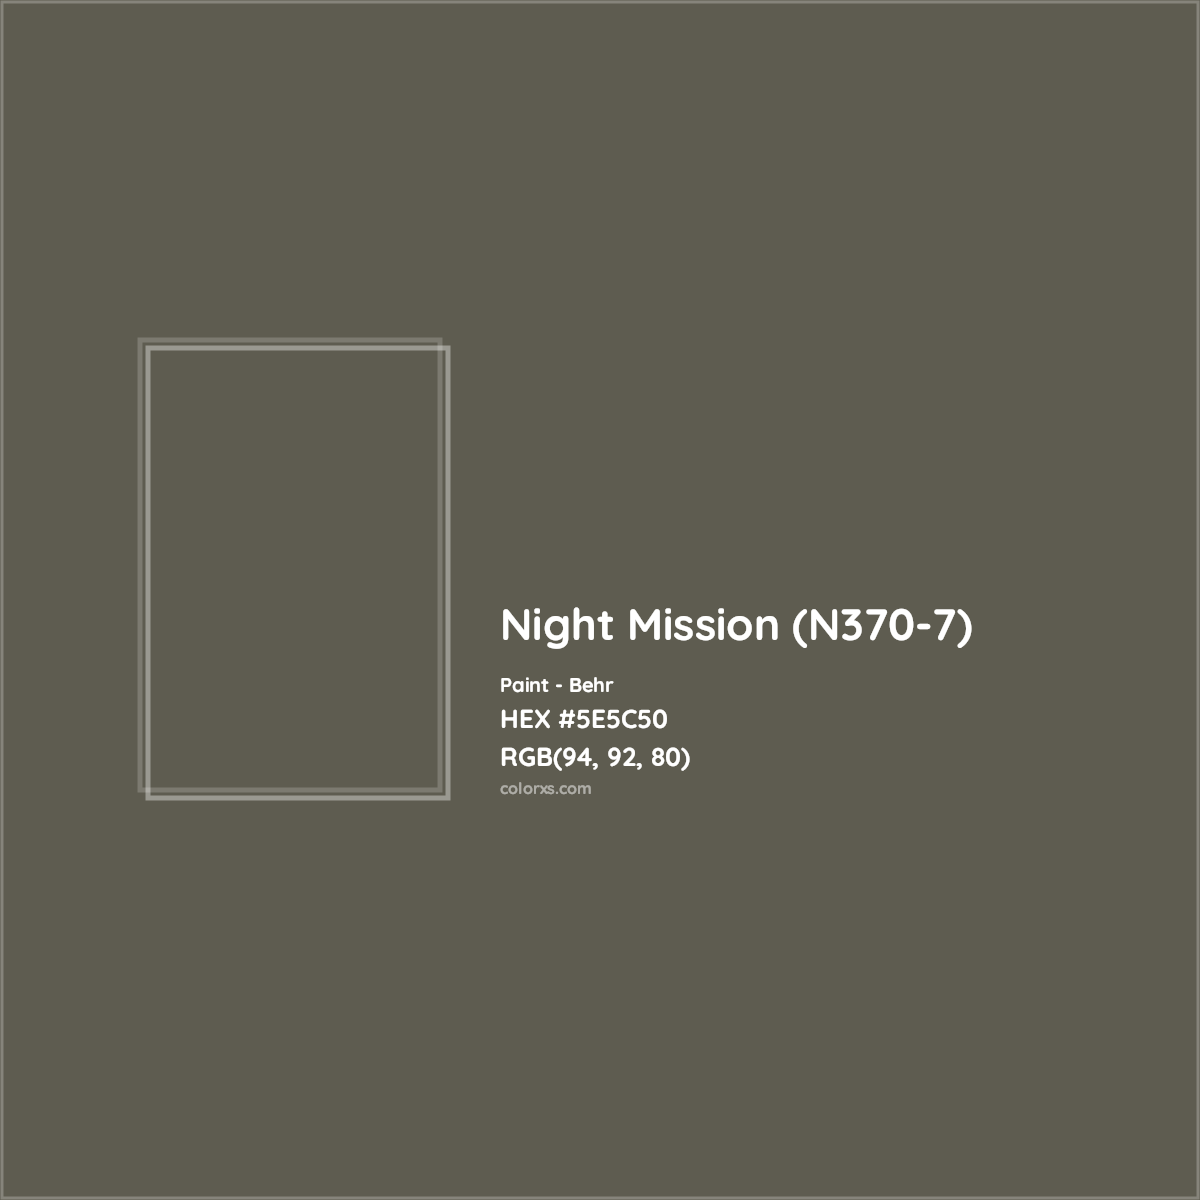 HEX #5E5C50 Night Mission (N370-7) Paint Behr - Color Code